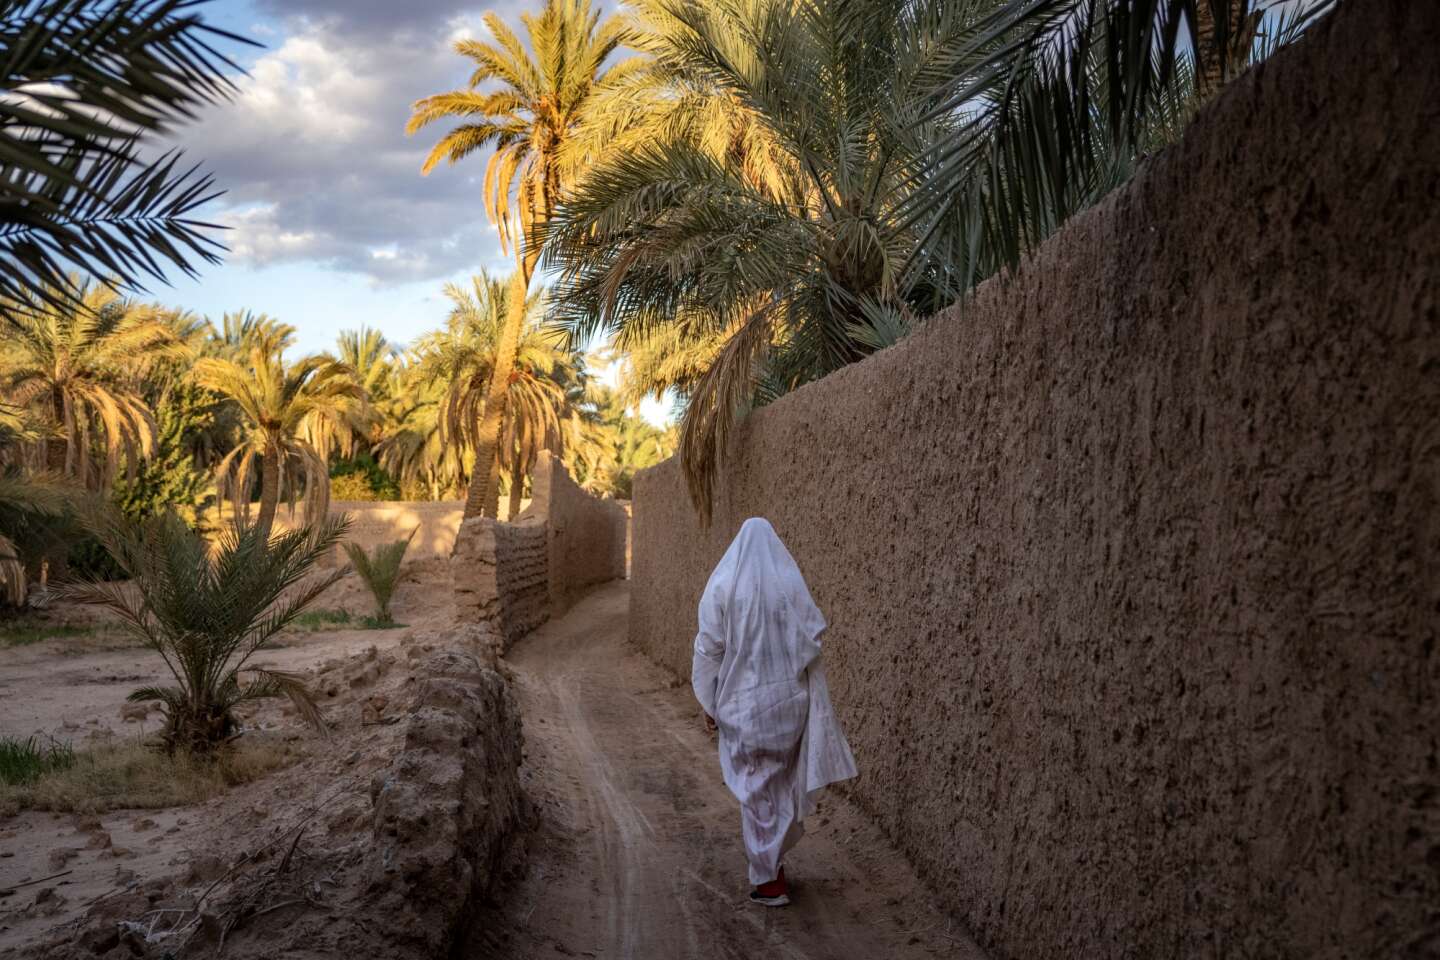 In the oasis of Figuig, an ancient way of life threatened by tensions between Rabat and Algiers